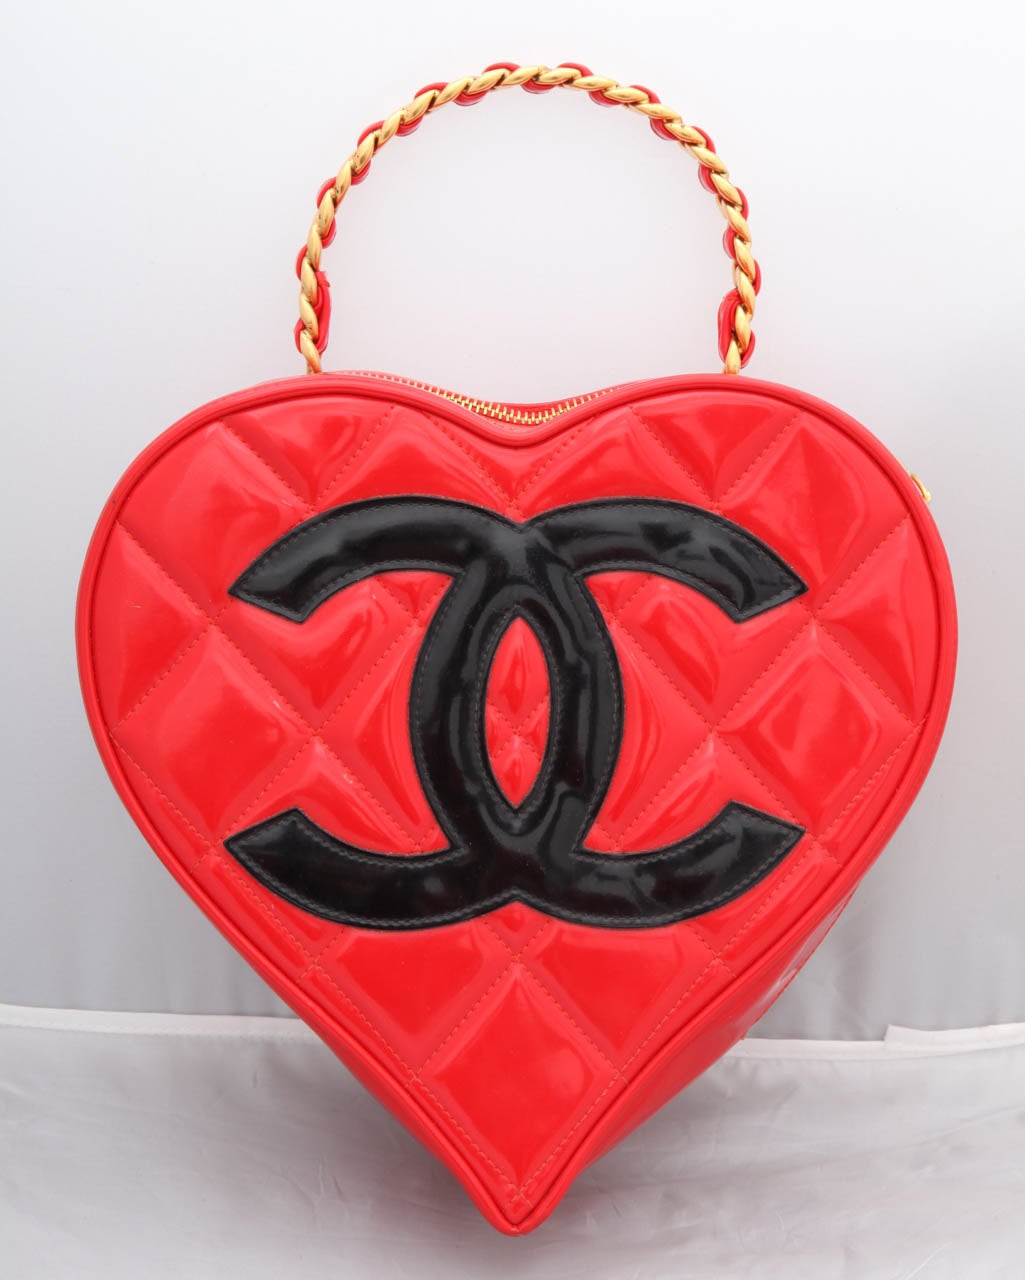 Extremely rare Chanel heart motif bag